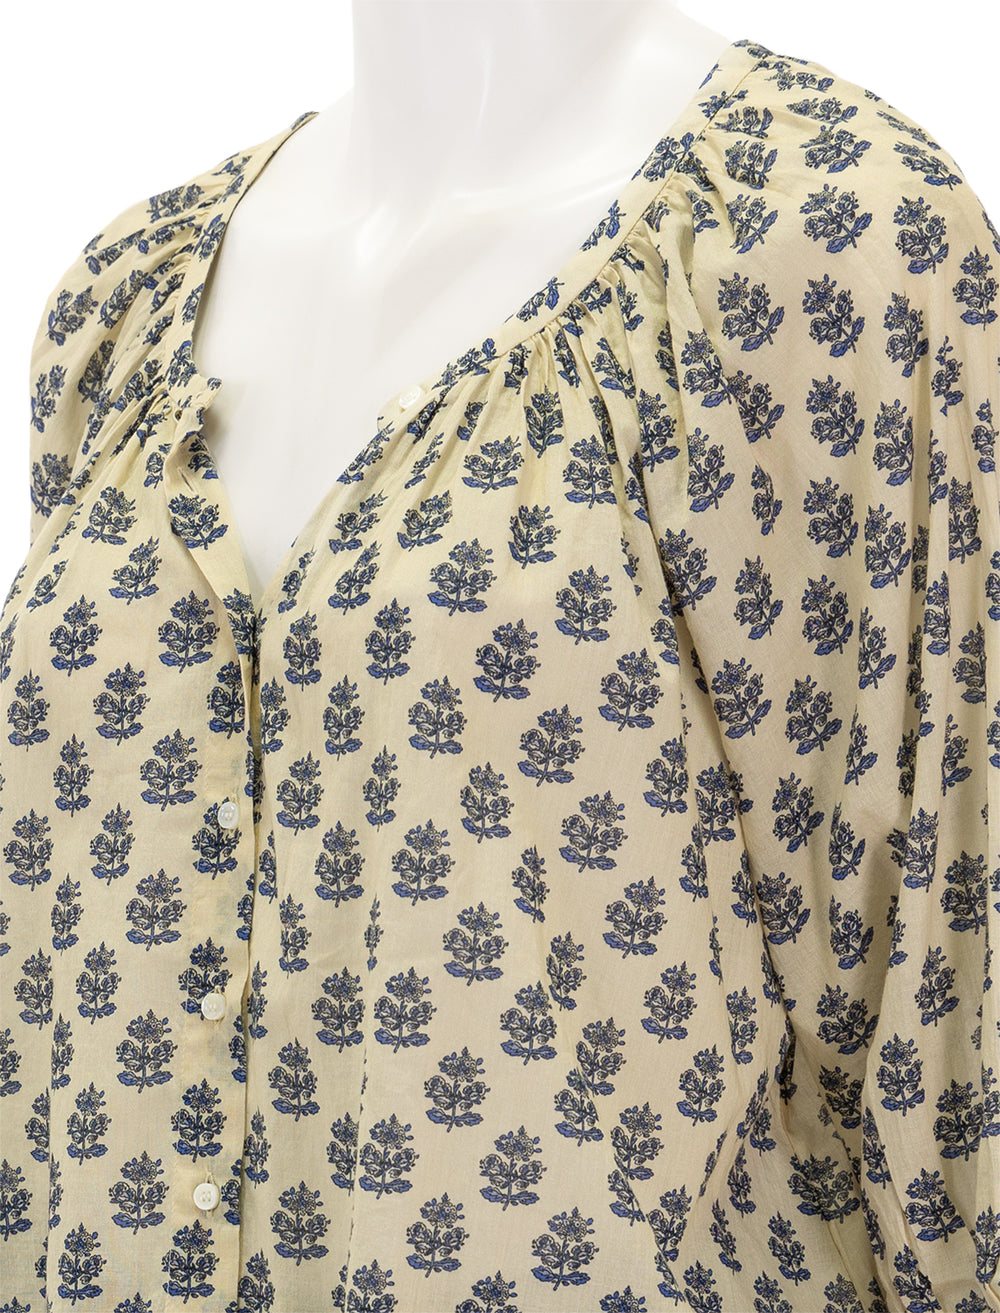 Close-up view of DOEN's jiana top meadowseet floral on voile.